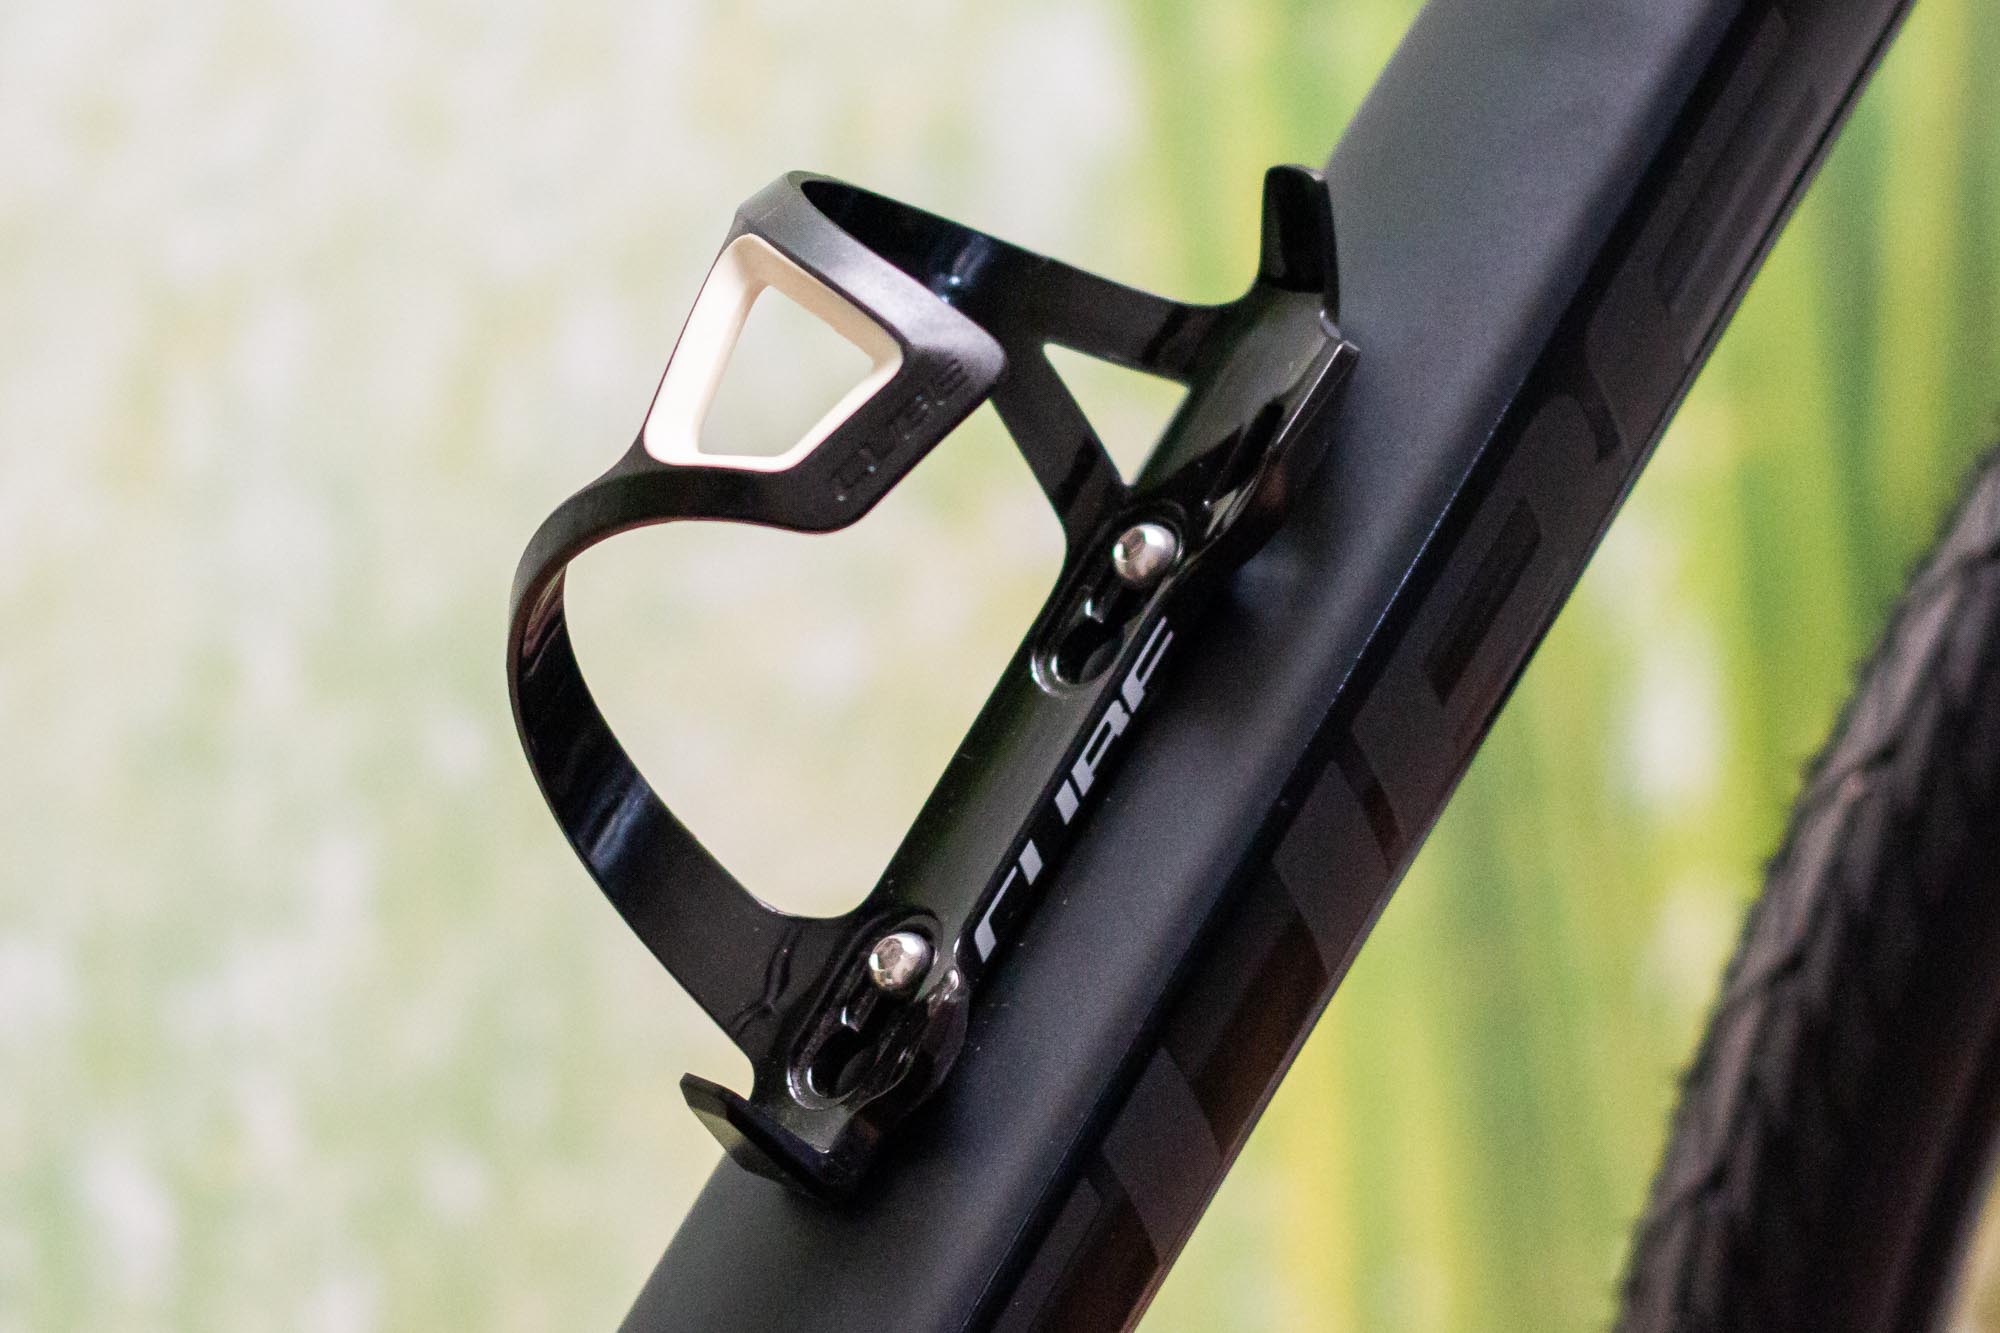 Cube HPA Anodised Cycling Bottle Cage